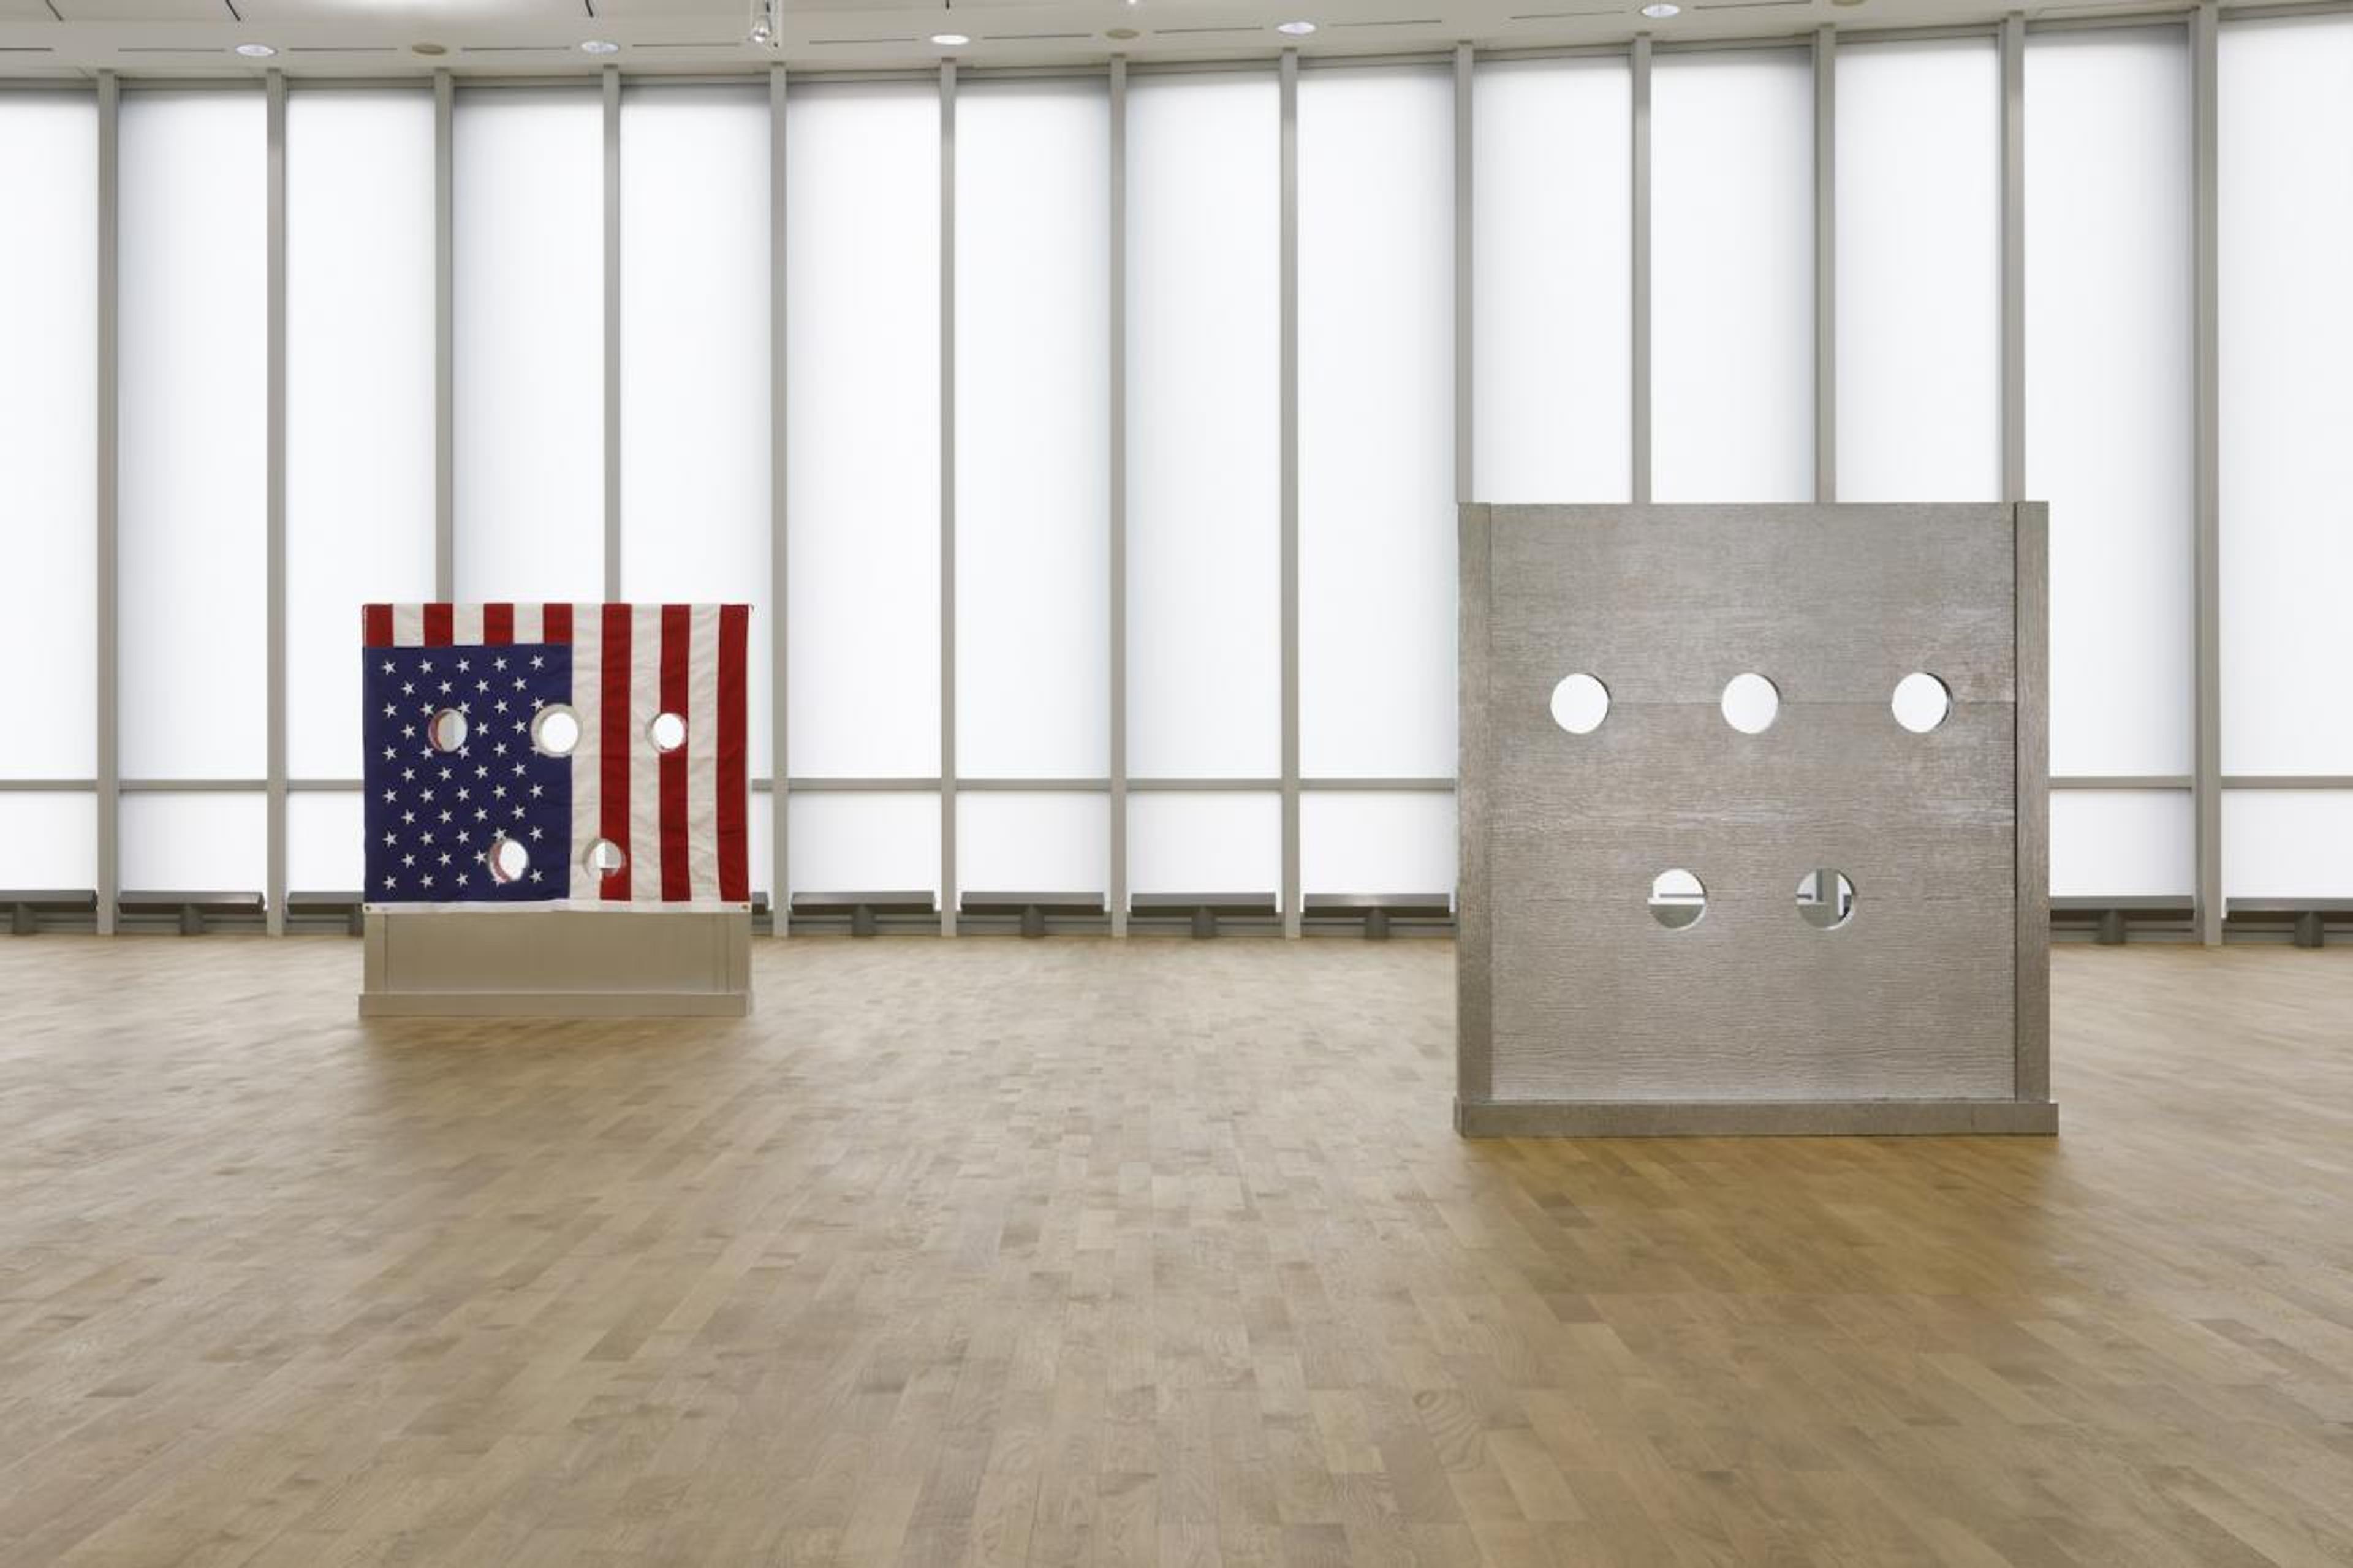 On the left: Cady Noland, Gibbet (1993/1994)  Courtesy The Brant Foundation, Greenwich, Connecticut (US) On the right: Cady Noland,  Beltway Terror  (1993/1994) Courtesy The Brant Foundation, Greenwich, Connecticut (US) Installation view MUSEUM MMK FÜR MODERNE KUNST; Photo: Axel Schneider